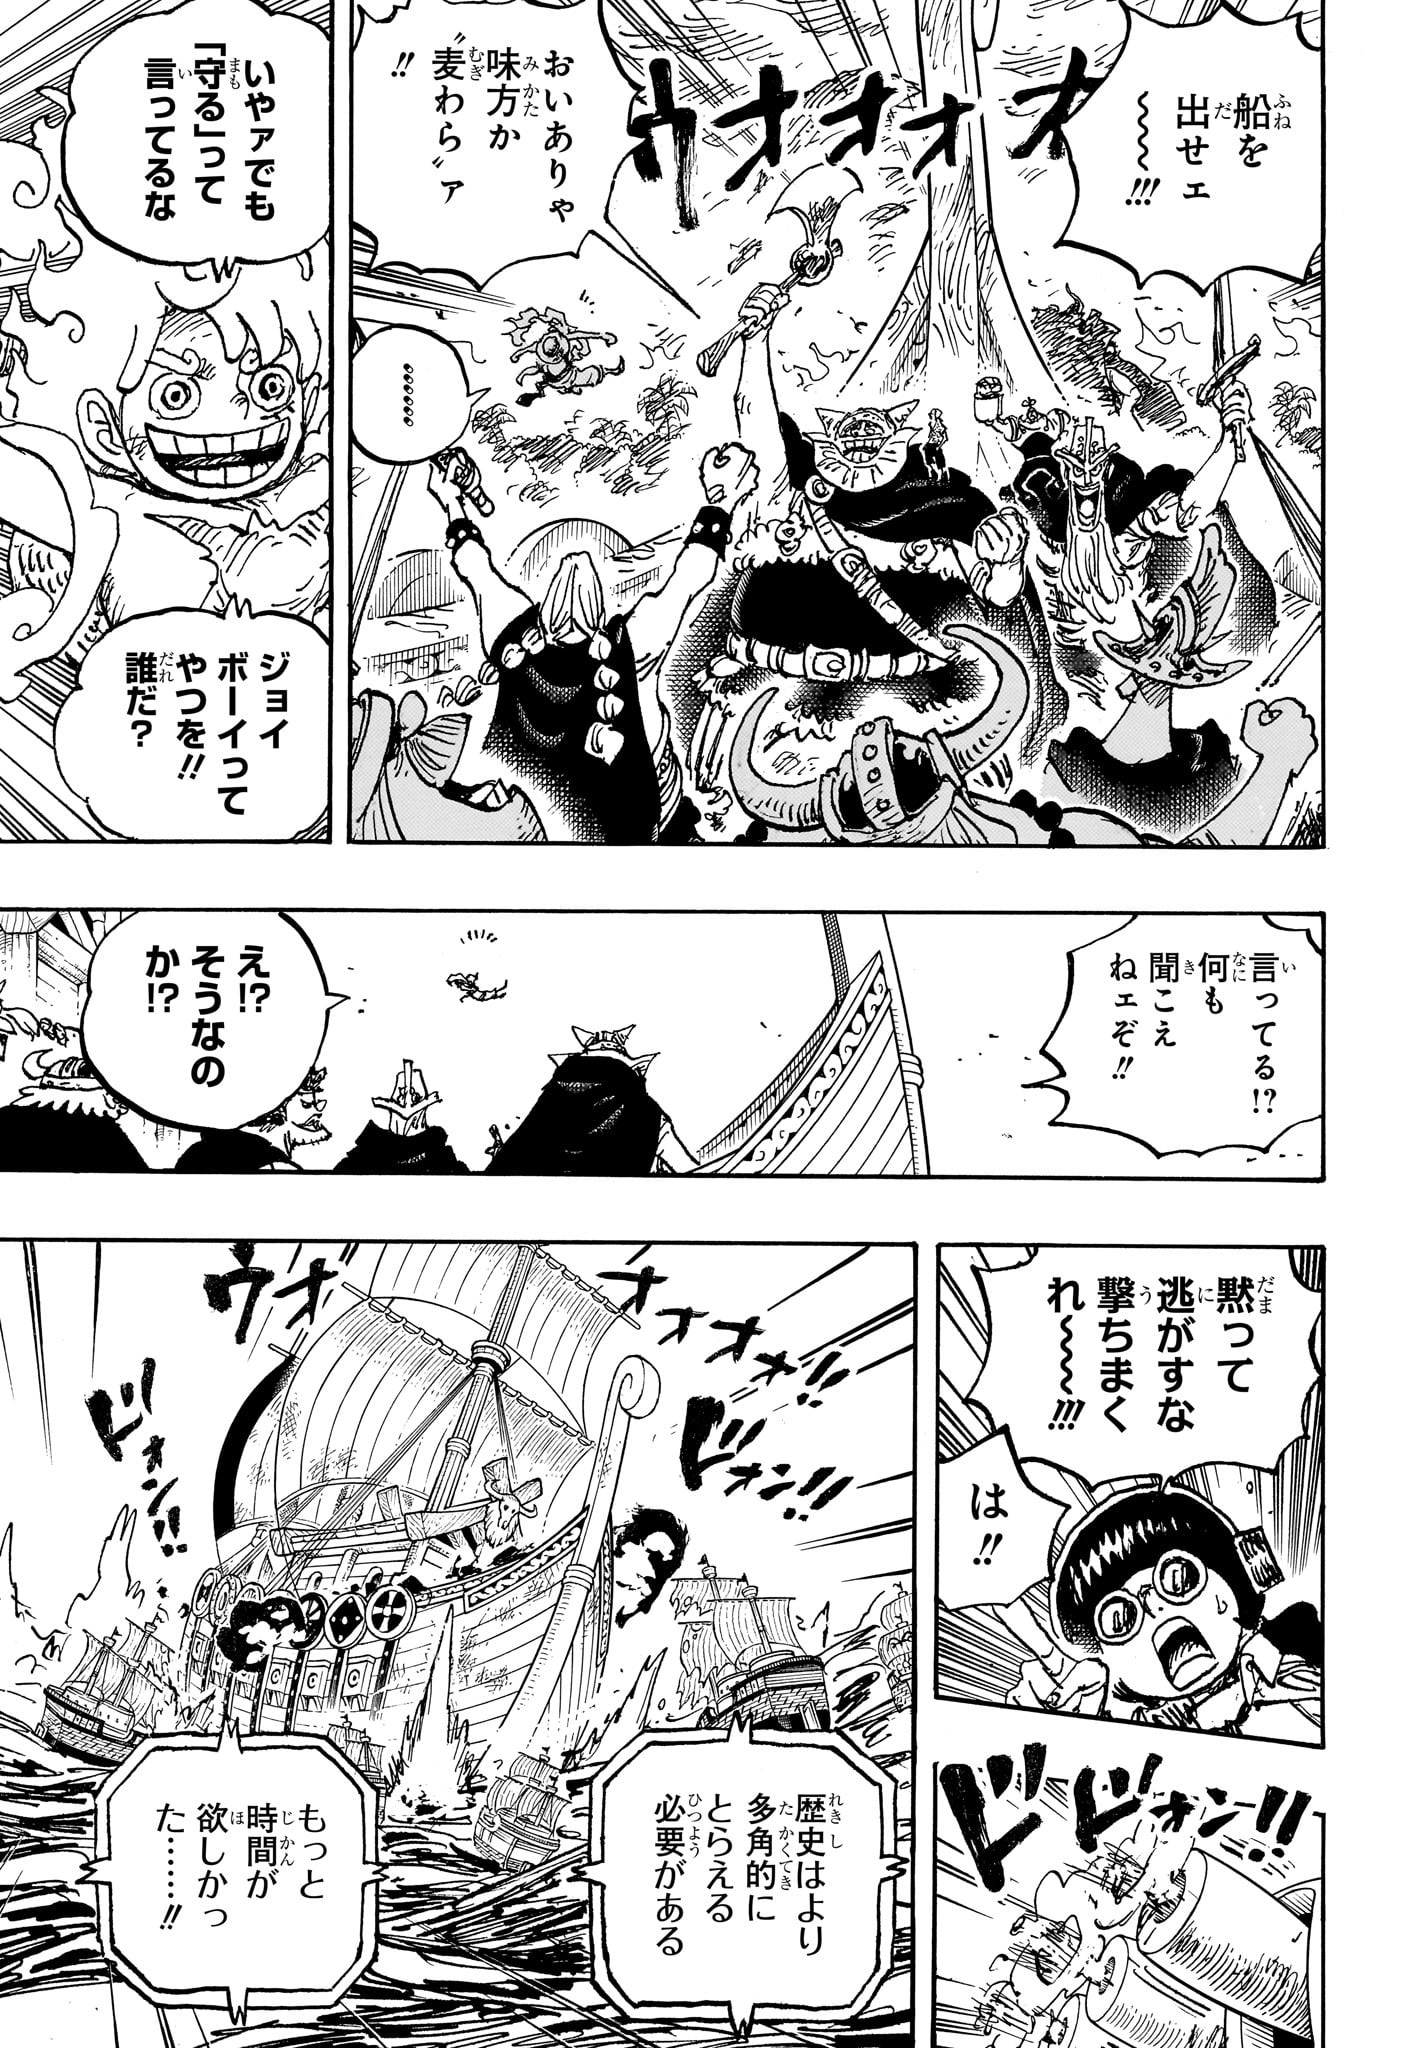 One Piece - Chapter 1120 - Page 13